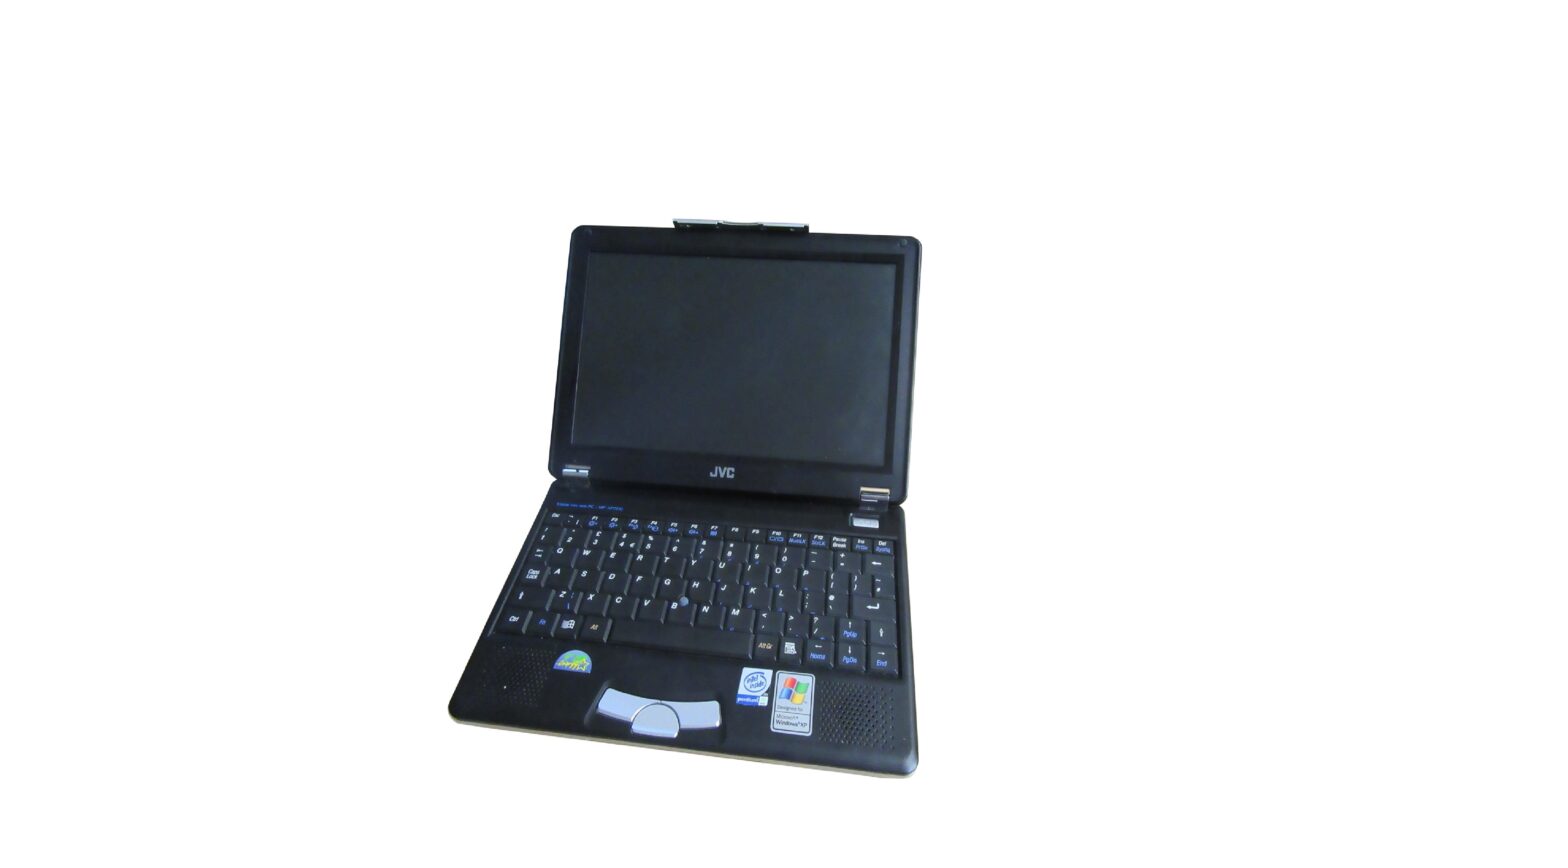 JVC MP-XP7220KR Mobile mini note PC featured